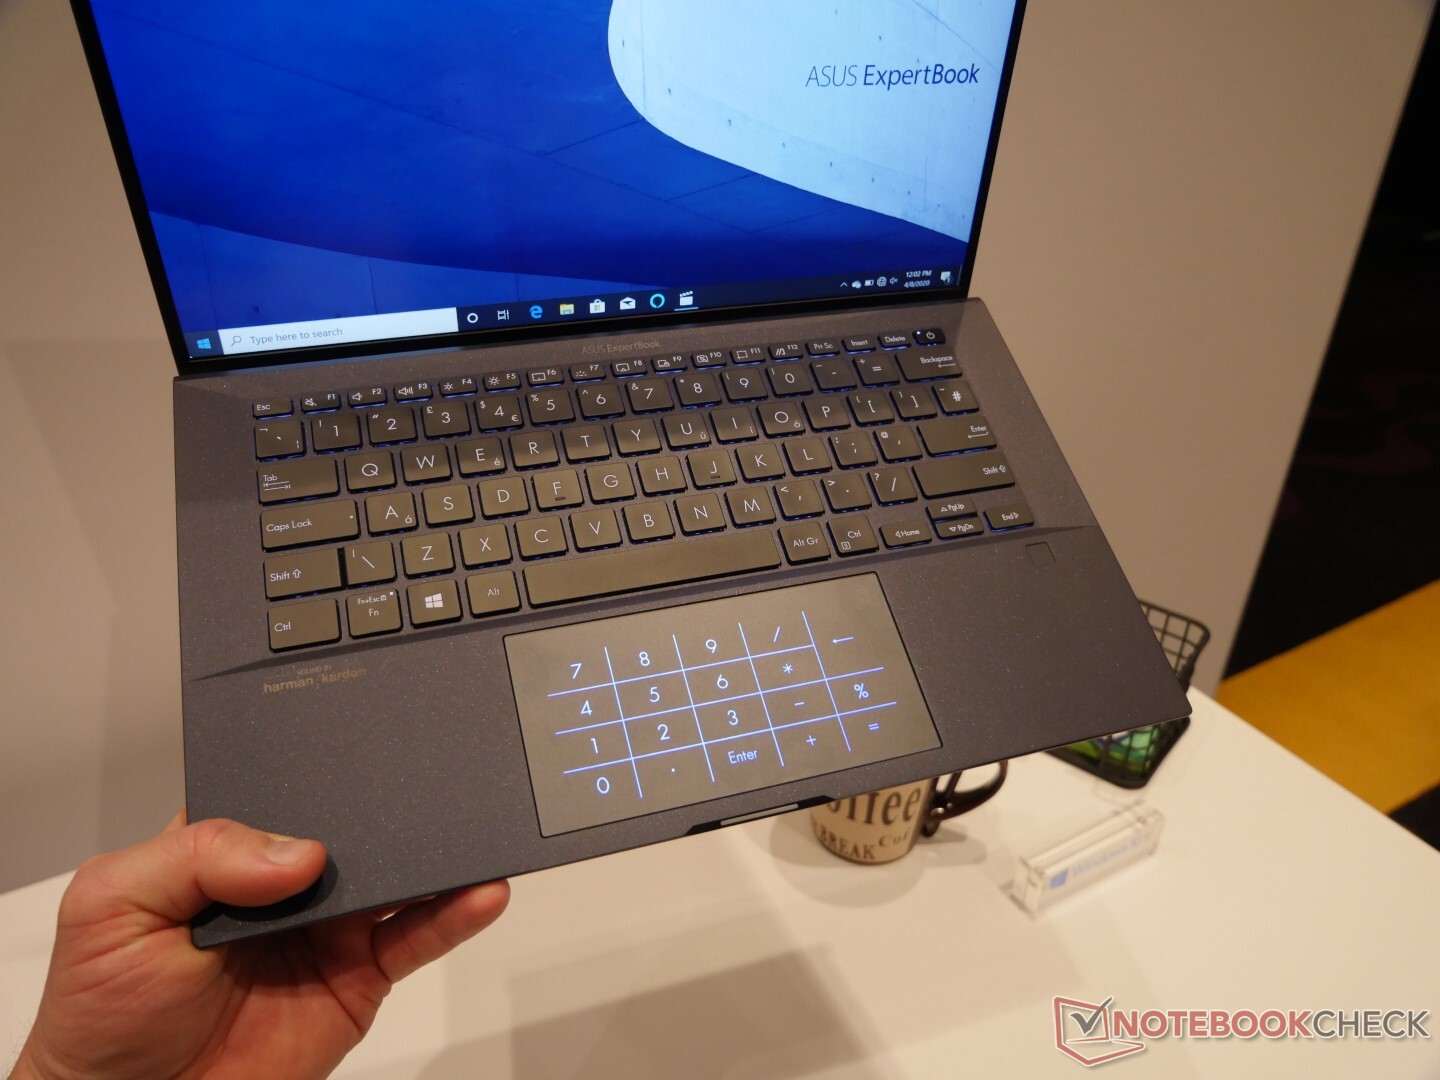 Asus renames the super-light AsusPro B9 to the ExpertBook B9 